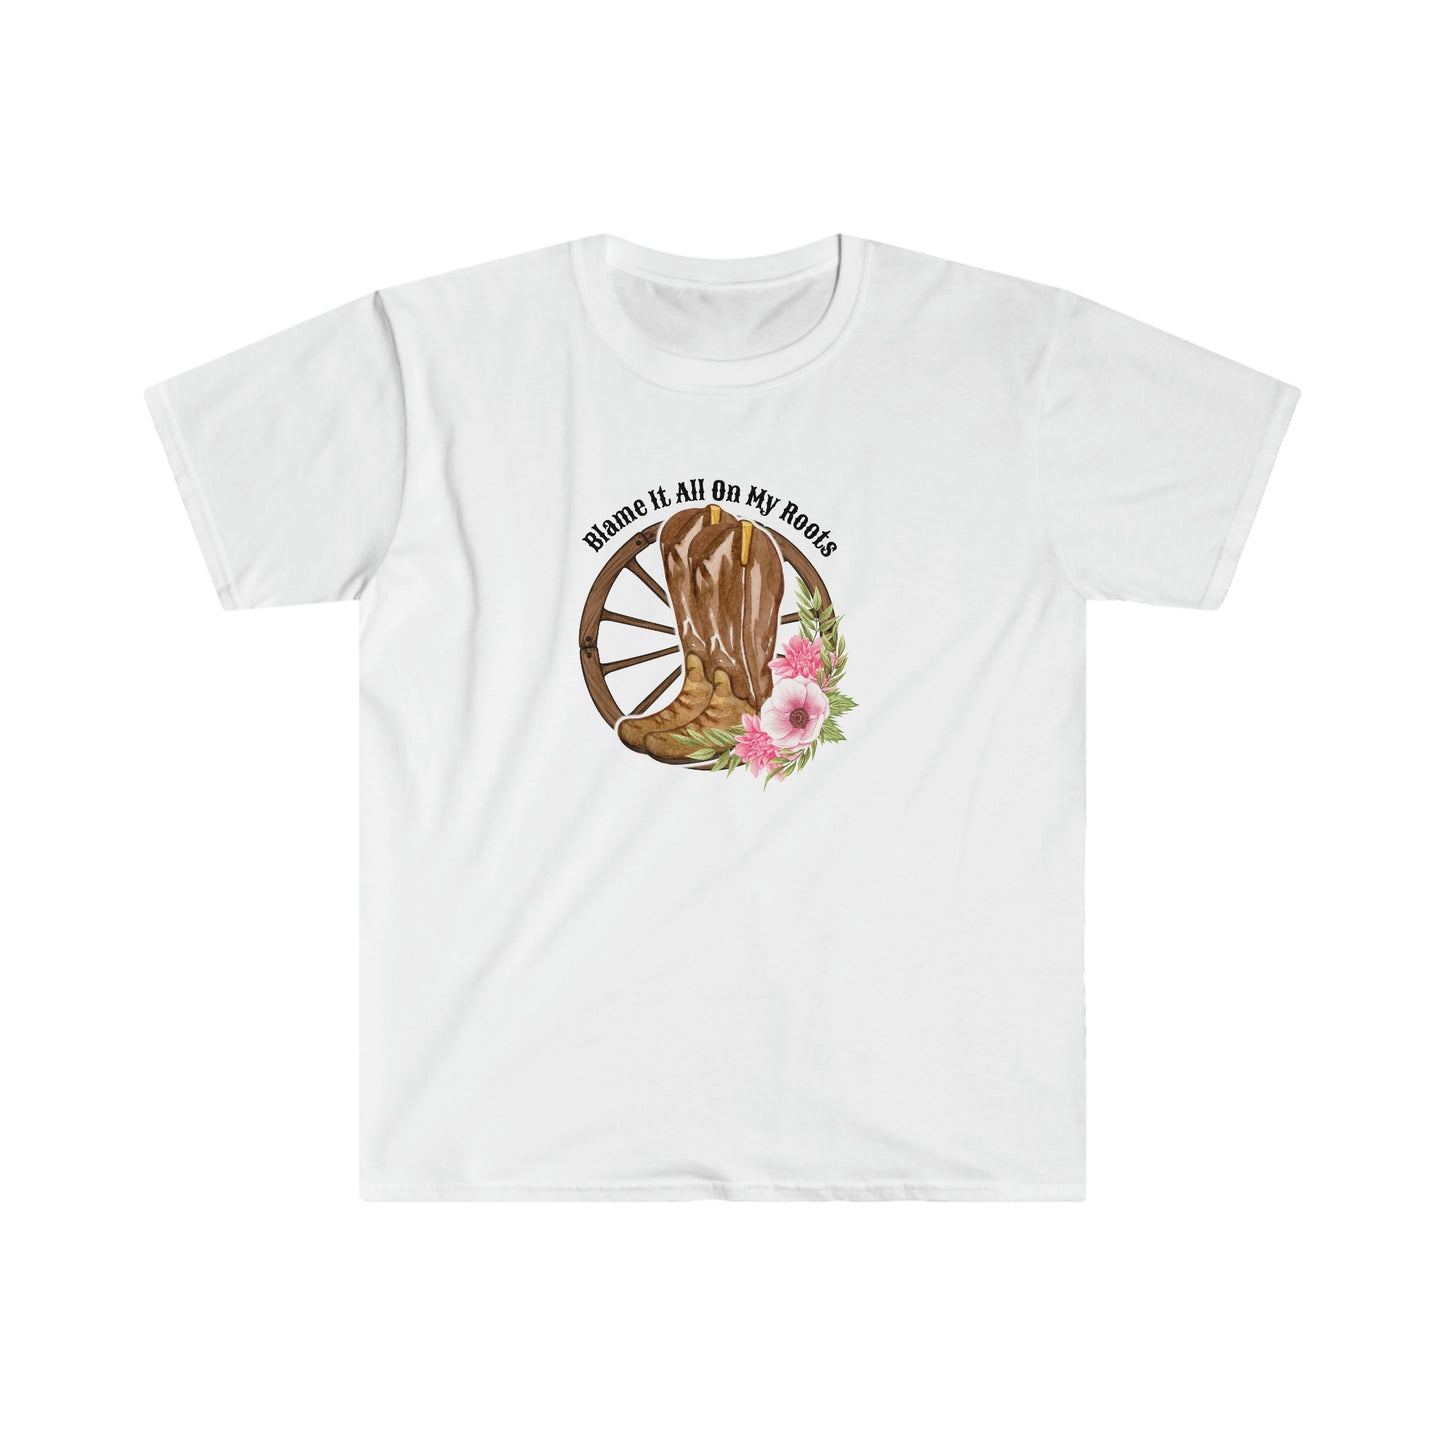 Blame it on my roots - Unisex Softstyle T-Shirt